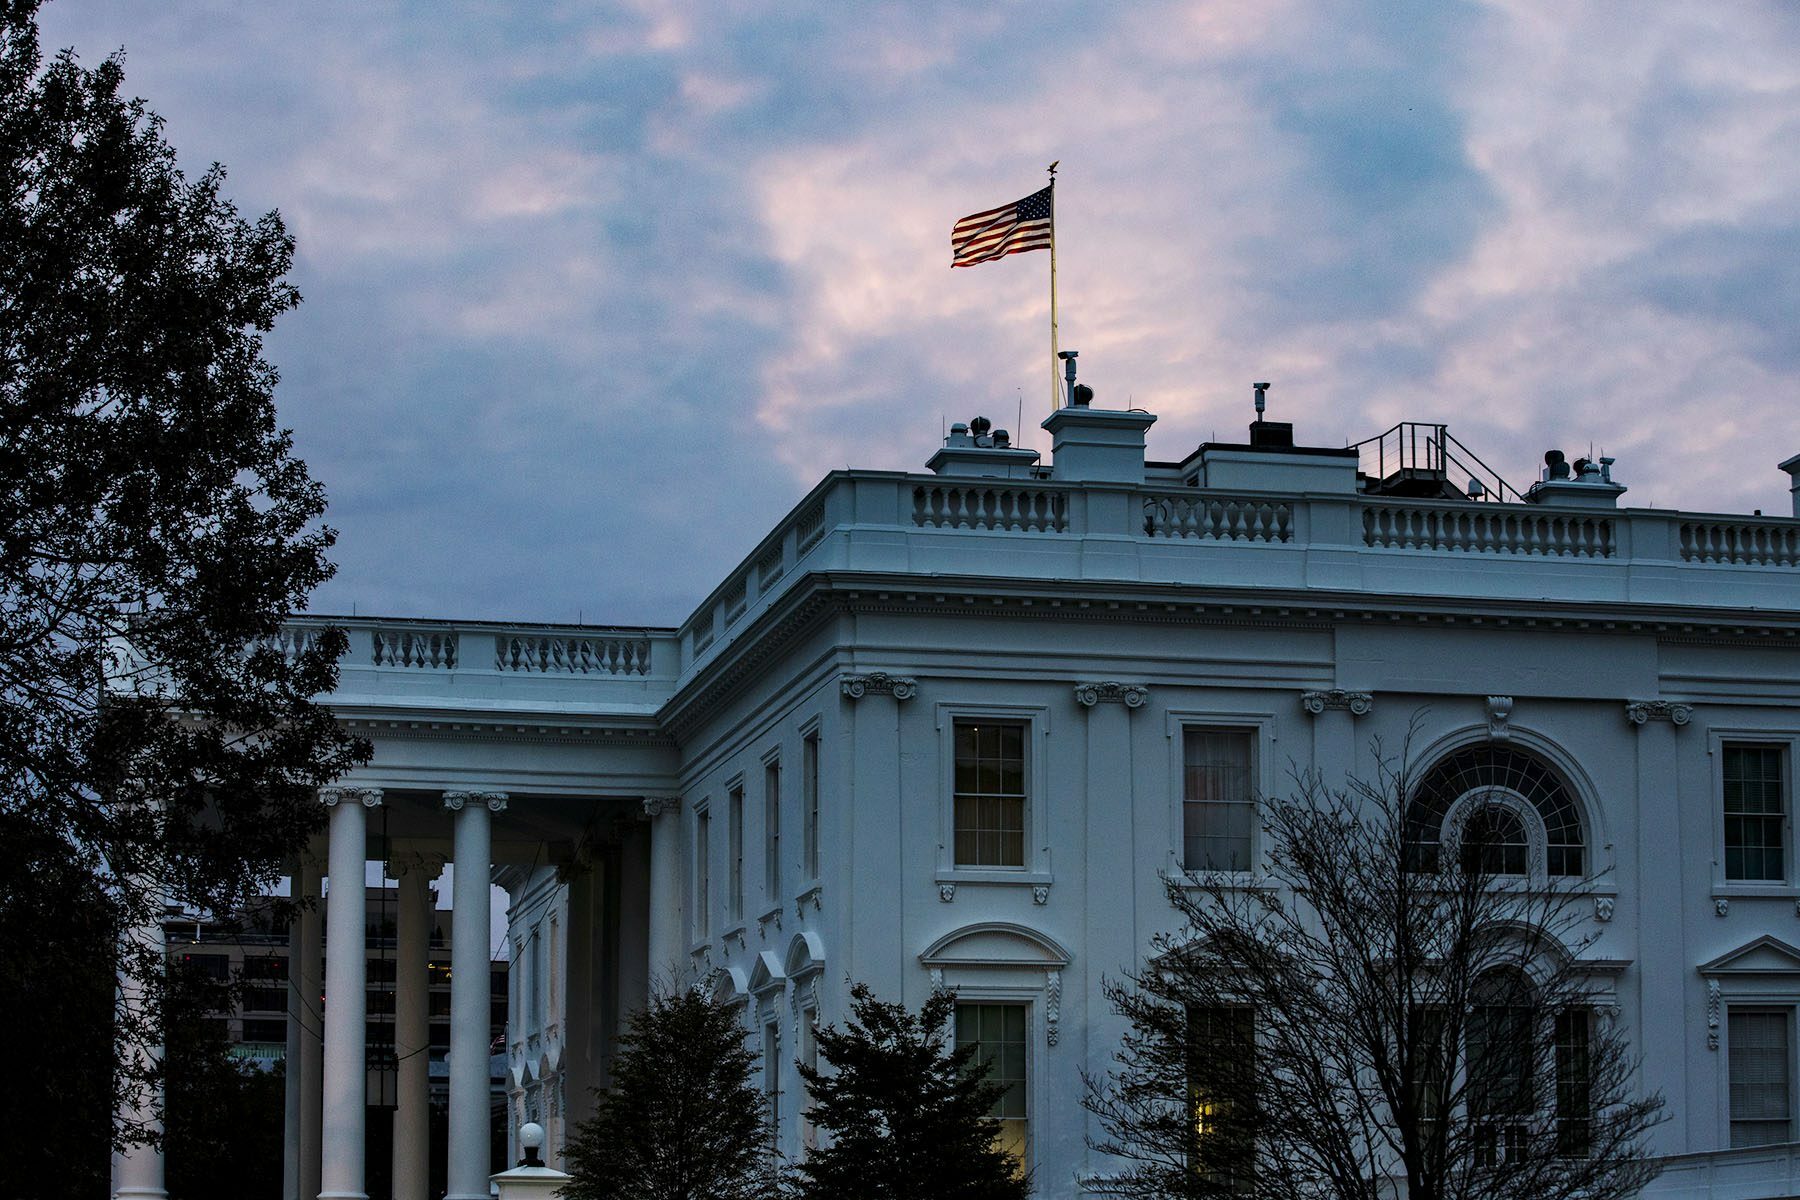 The white house at sunset.